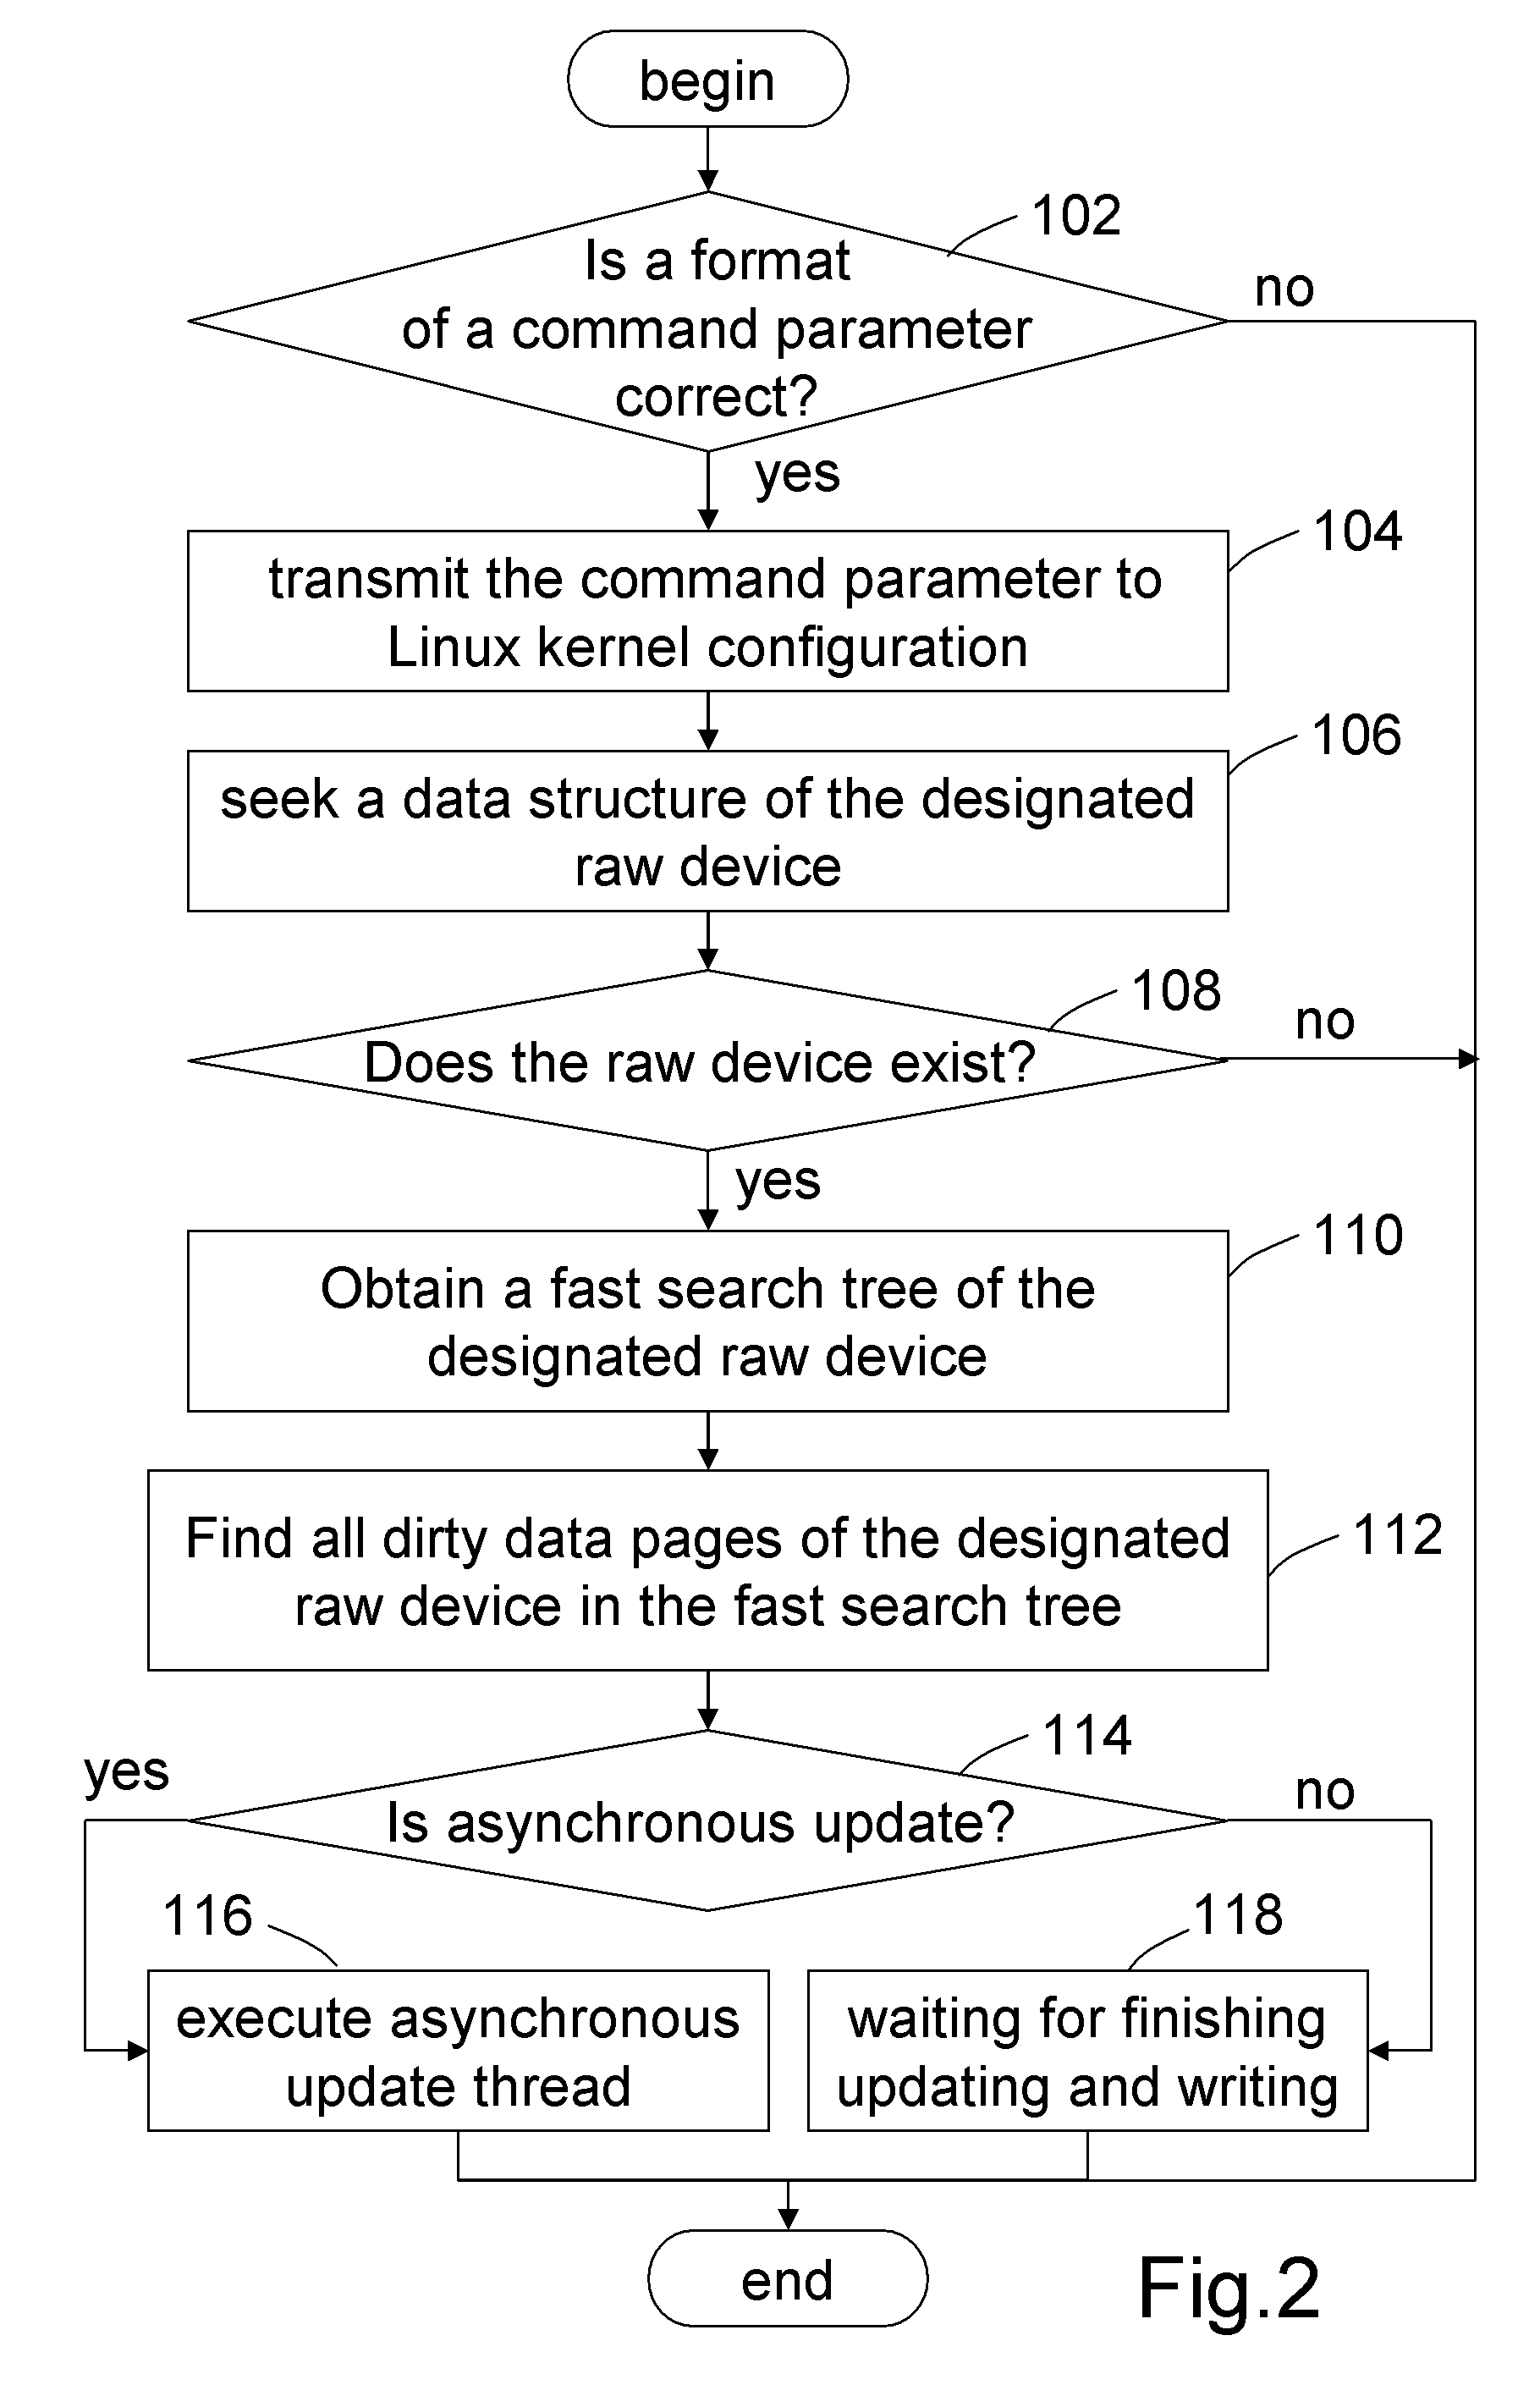 System and method for updating dirty data of designated raw device